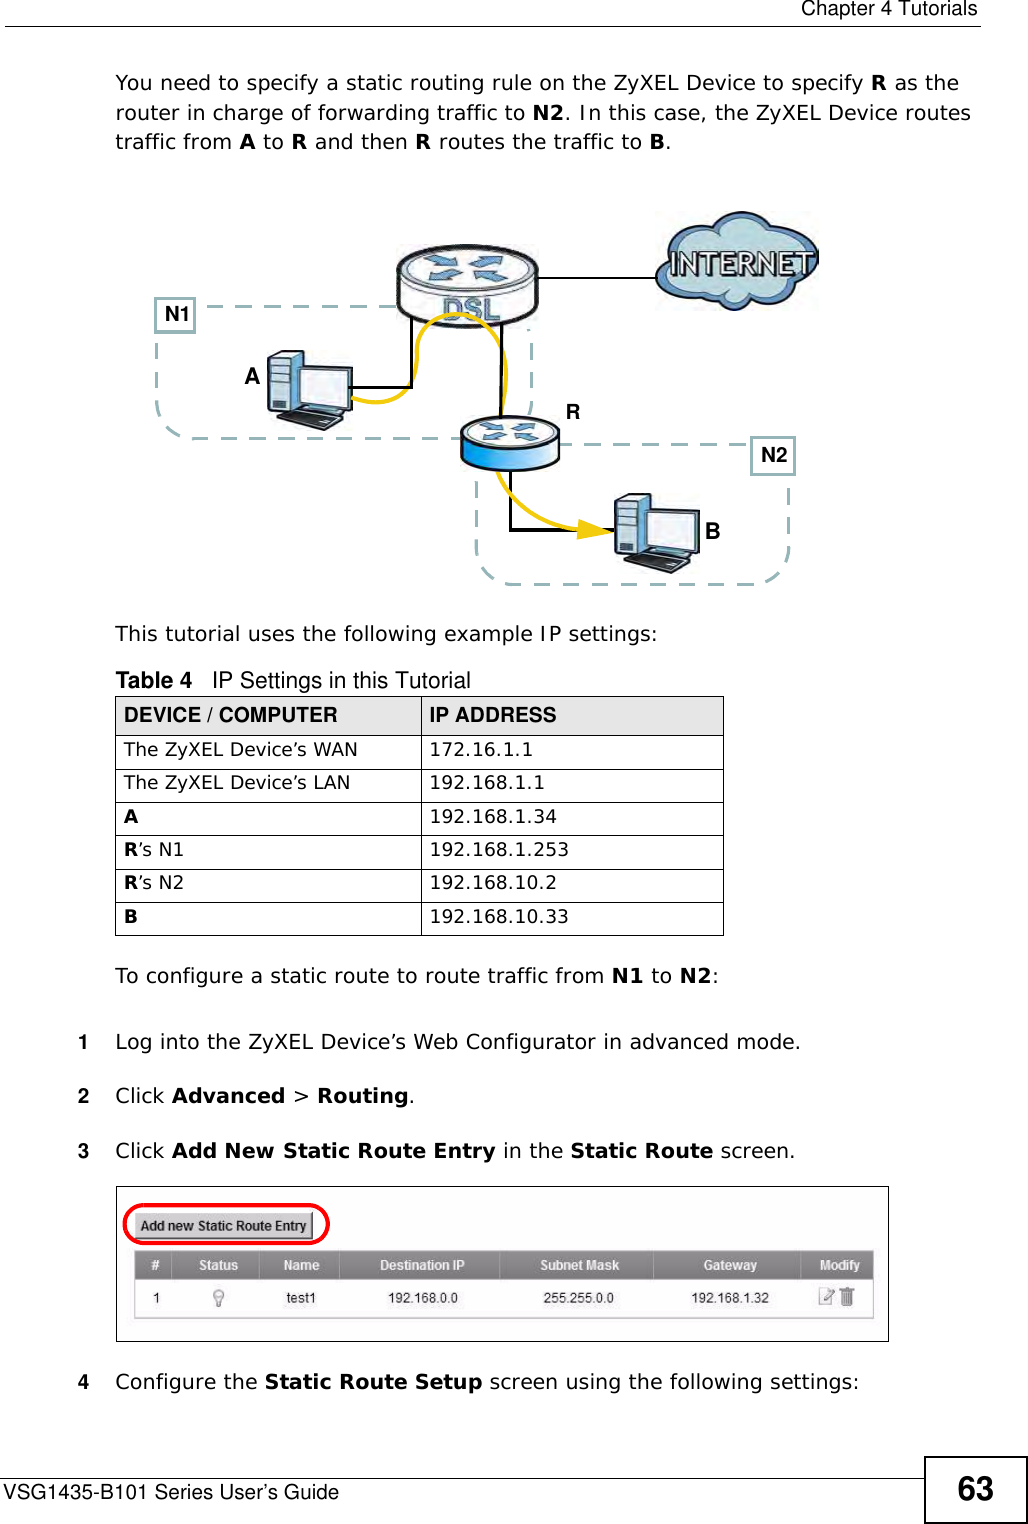  Chapter 4 TutorialsVSG1435-B101 Series User’s Guide 63You need to specify a static routing rule on the ZyXEL Device to specify R as the router in charge of forwarding traffic to N2. In this case, the ZyXEL Device routes traffic from A to R and then R routes the traffic to B.This tutorial uses the following example IP settings:To configure a static route to route traffic from N1 to N2:1Log into the ZyXEL Device’s Web Configurator in advanced mode.2Click Advanced &gt; Routing.3Click Add New Static Route Entry in the Static Route screen.4Configure the Static Route Setup screen using the following settings:Table 4   IP Settings in this TutorialDEVICE / COMPUTER IP ADDRESSThe ZyXEL Device’s WAN 172.16.1.1The ZyXEL Device’s LAN 192.168.1.1A192.168.1.34R’s N1  192.168.1.253R’s N2  192.168.10.2B192.168.10.33N2BN1AR